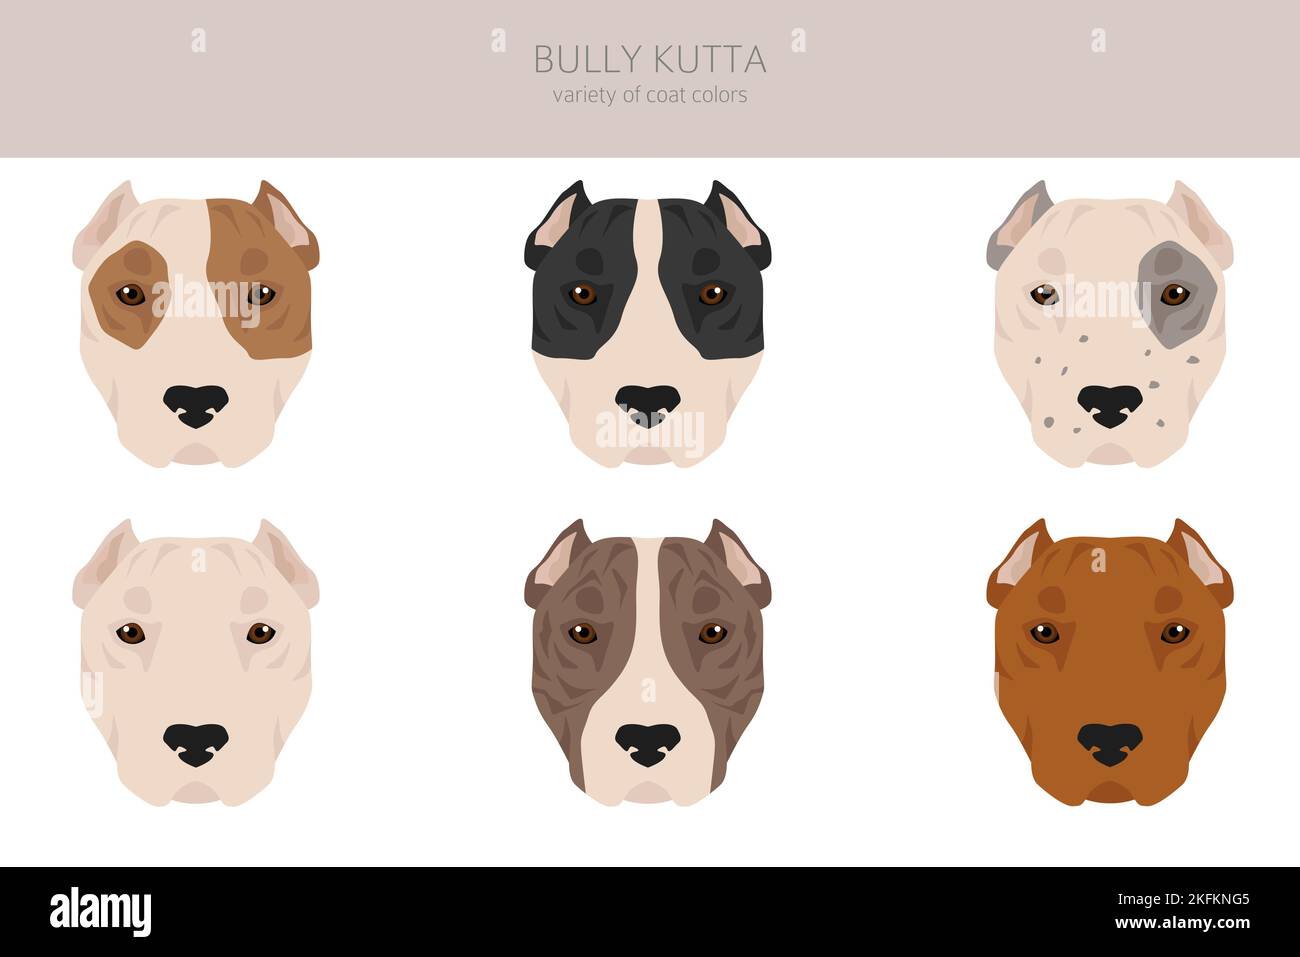 what is the breed of bully kutta